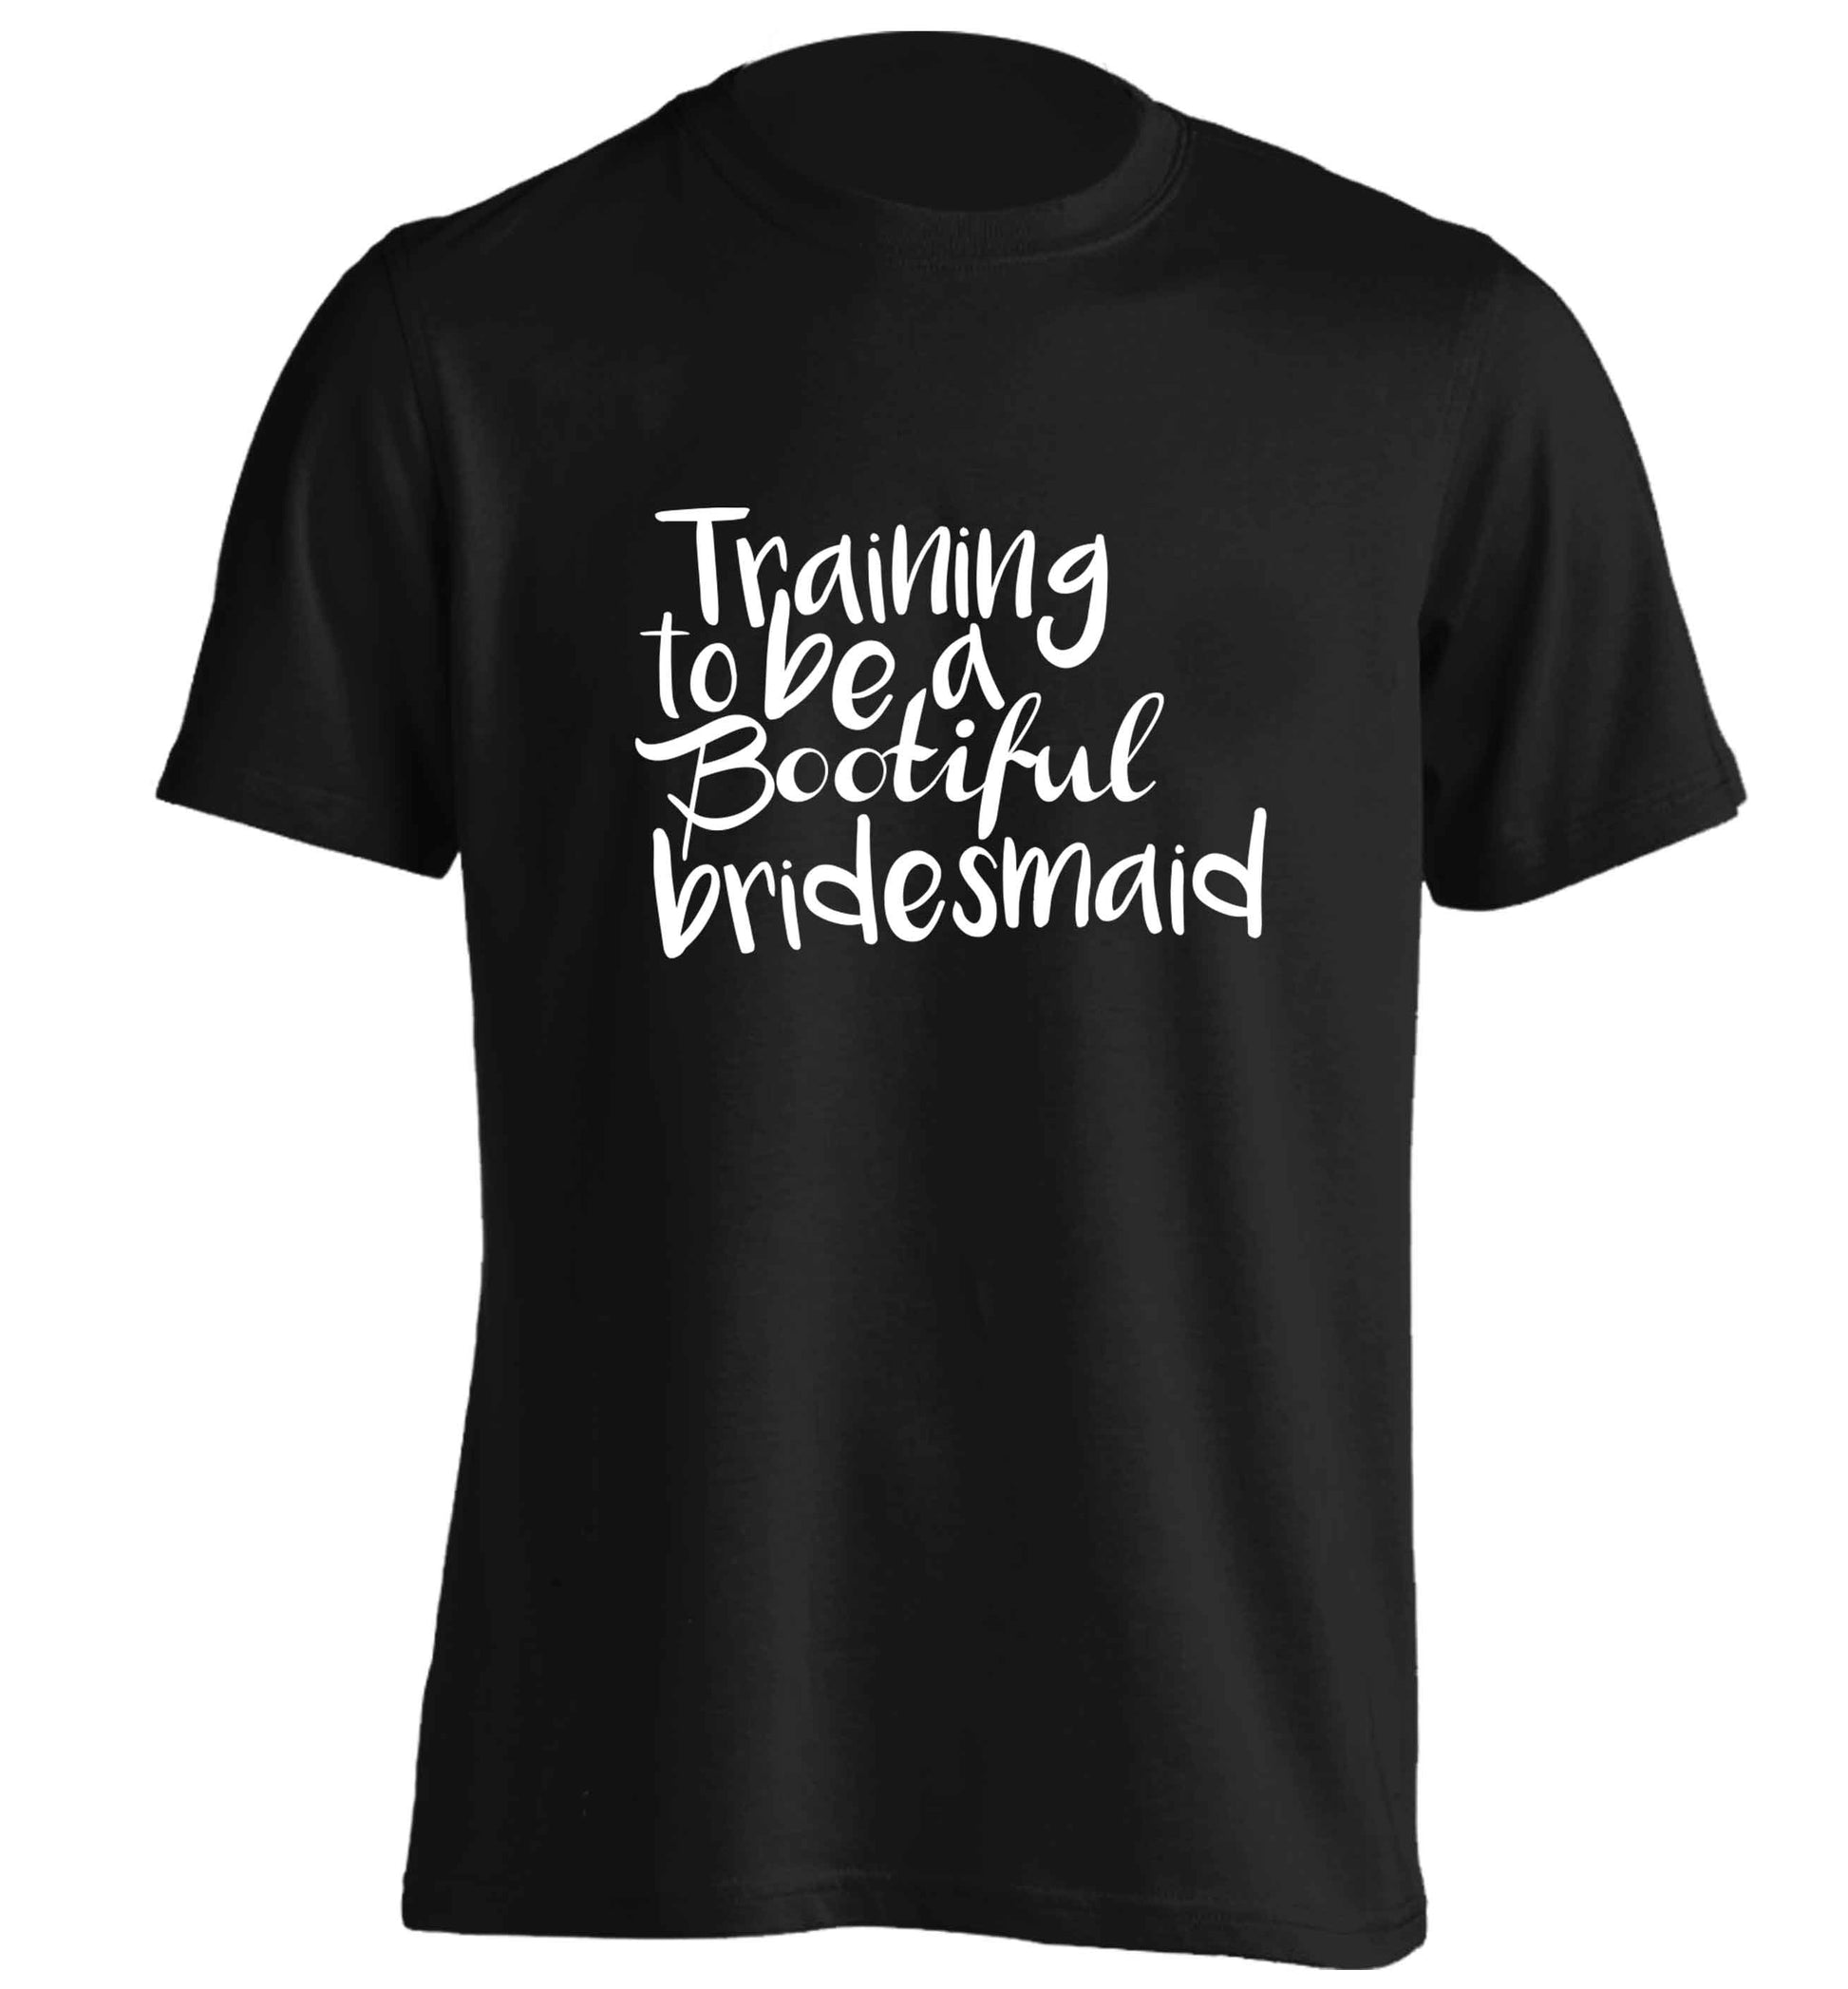 Get motivated and get fit for your big day! Our workout quotes and designs will get you ready to sweat! Perfect for any bride, groom or bridesmaid to be!  adults unisex black Tshirt 2XL